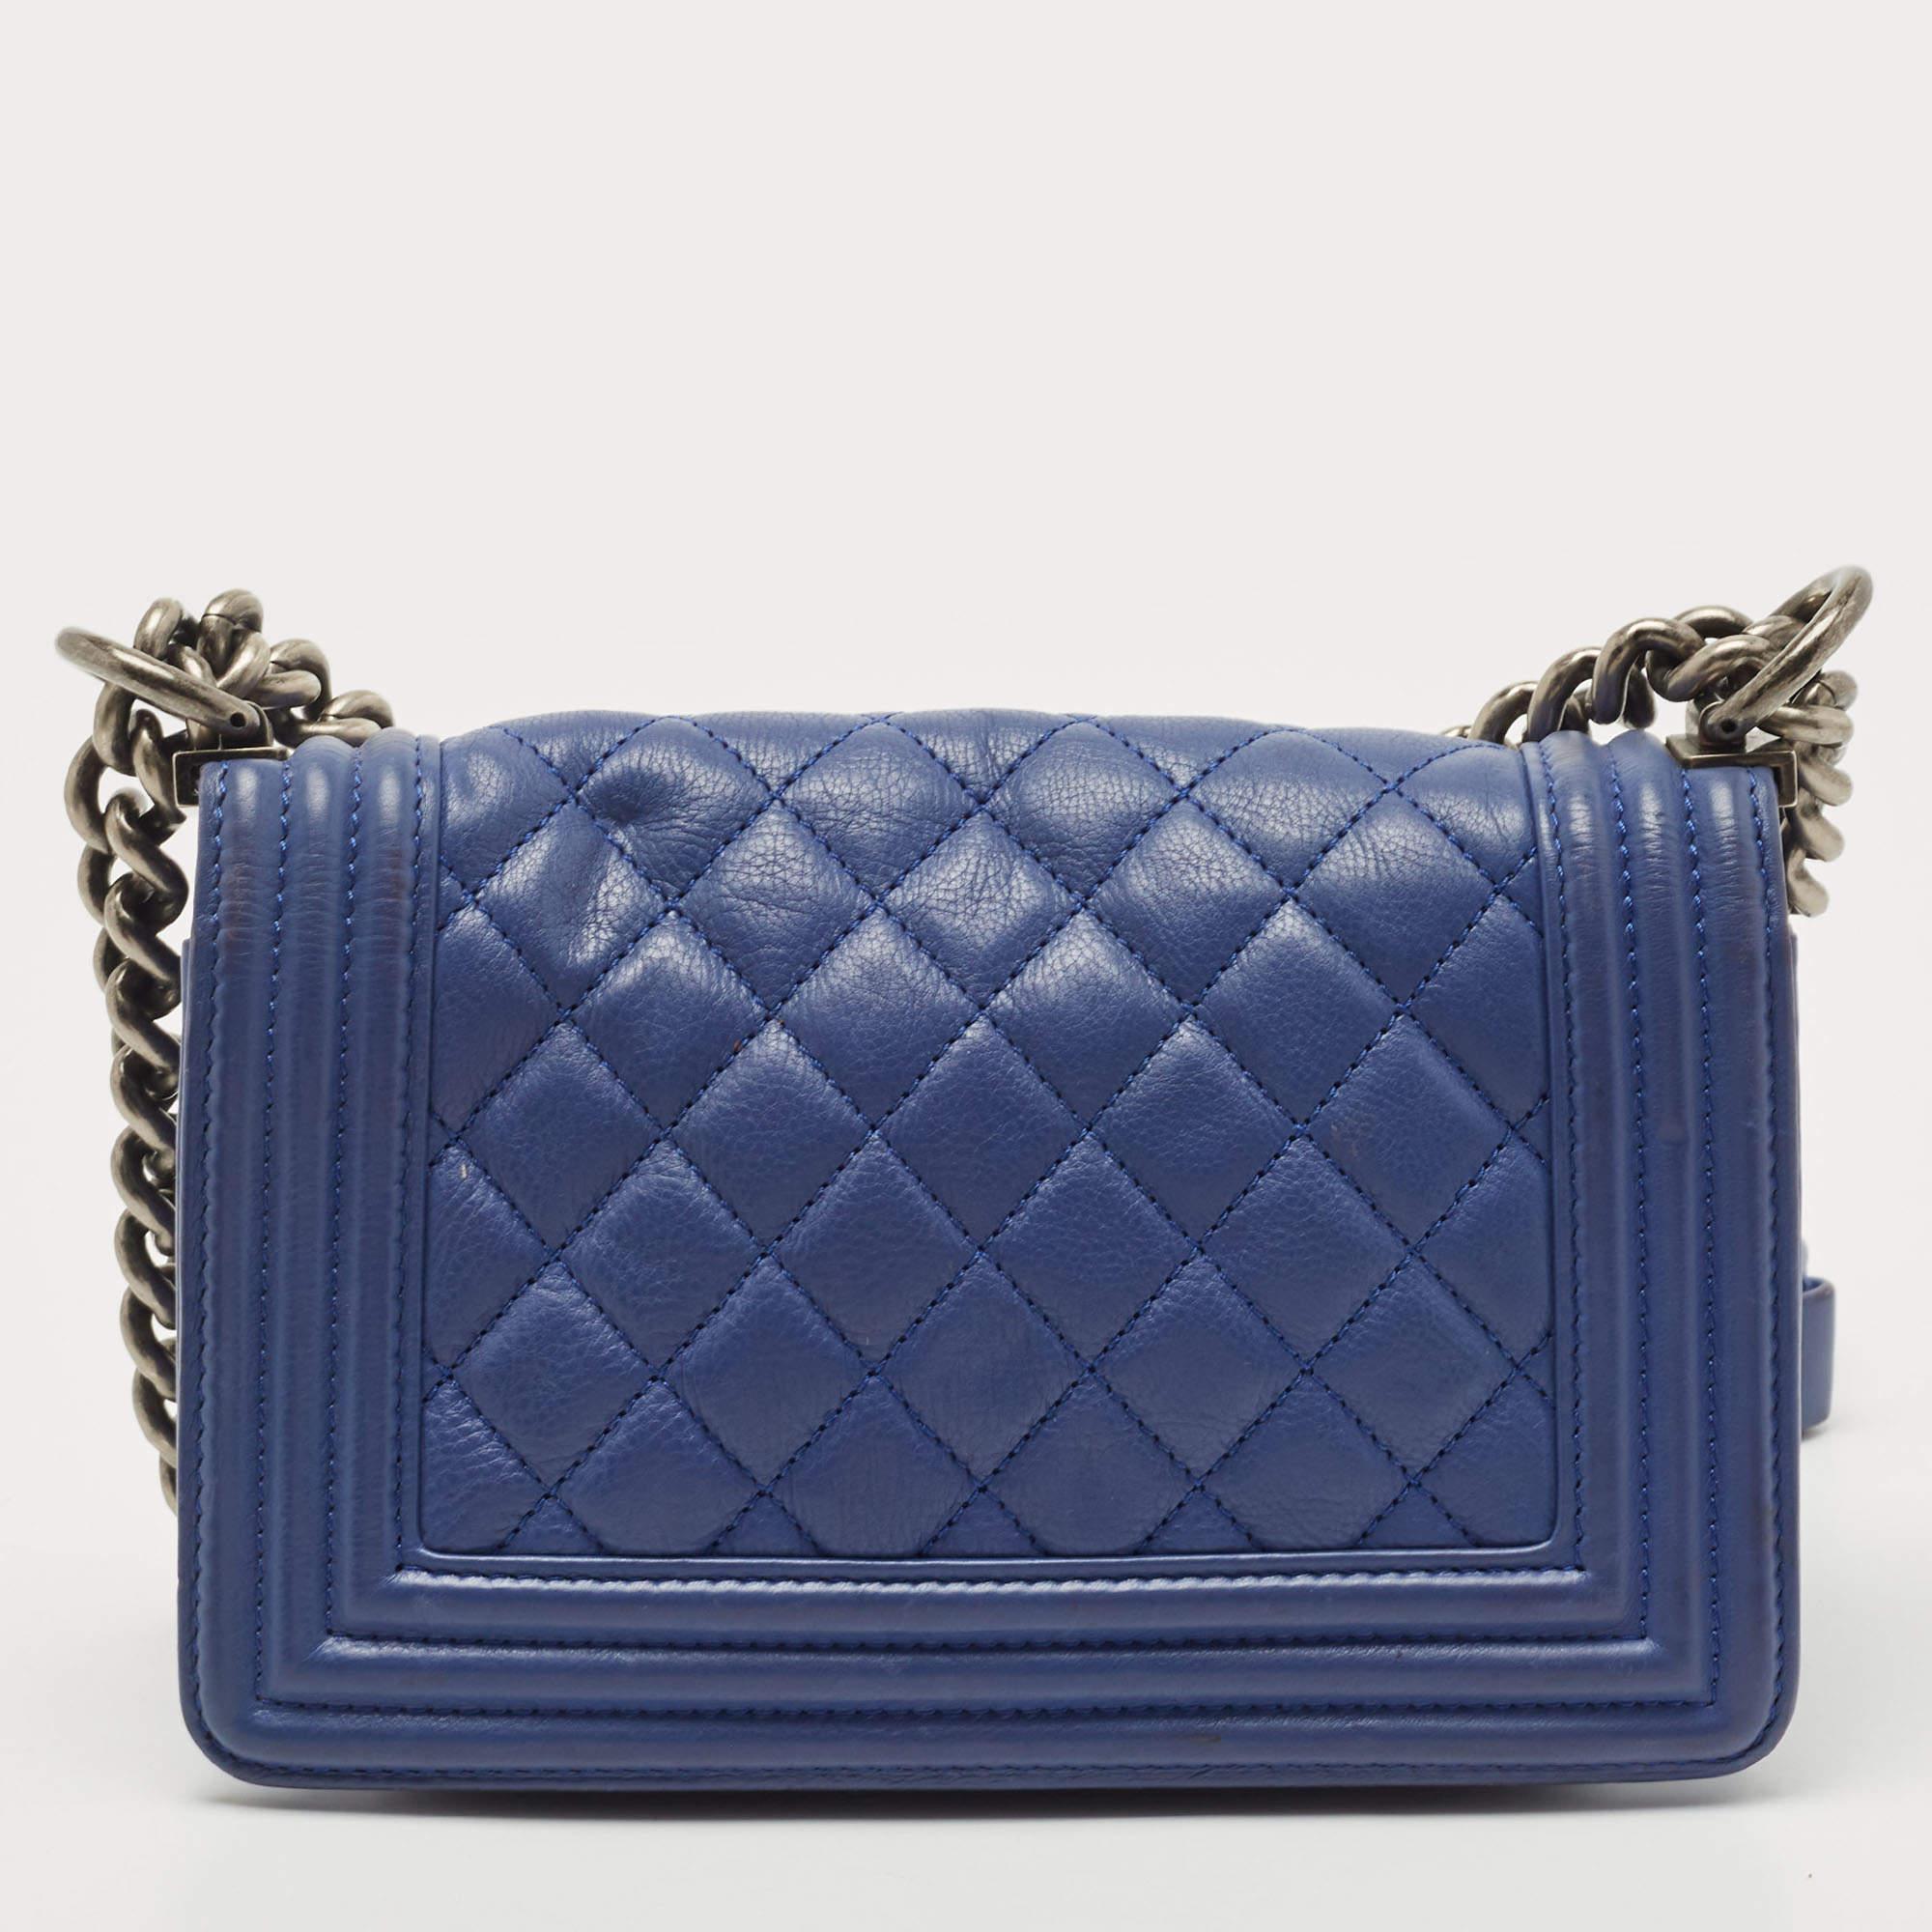 Chanel Blue Quilted Leather Small Boy Flap Bag 3